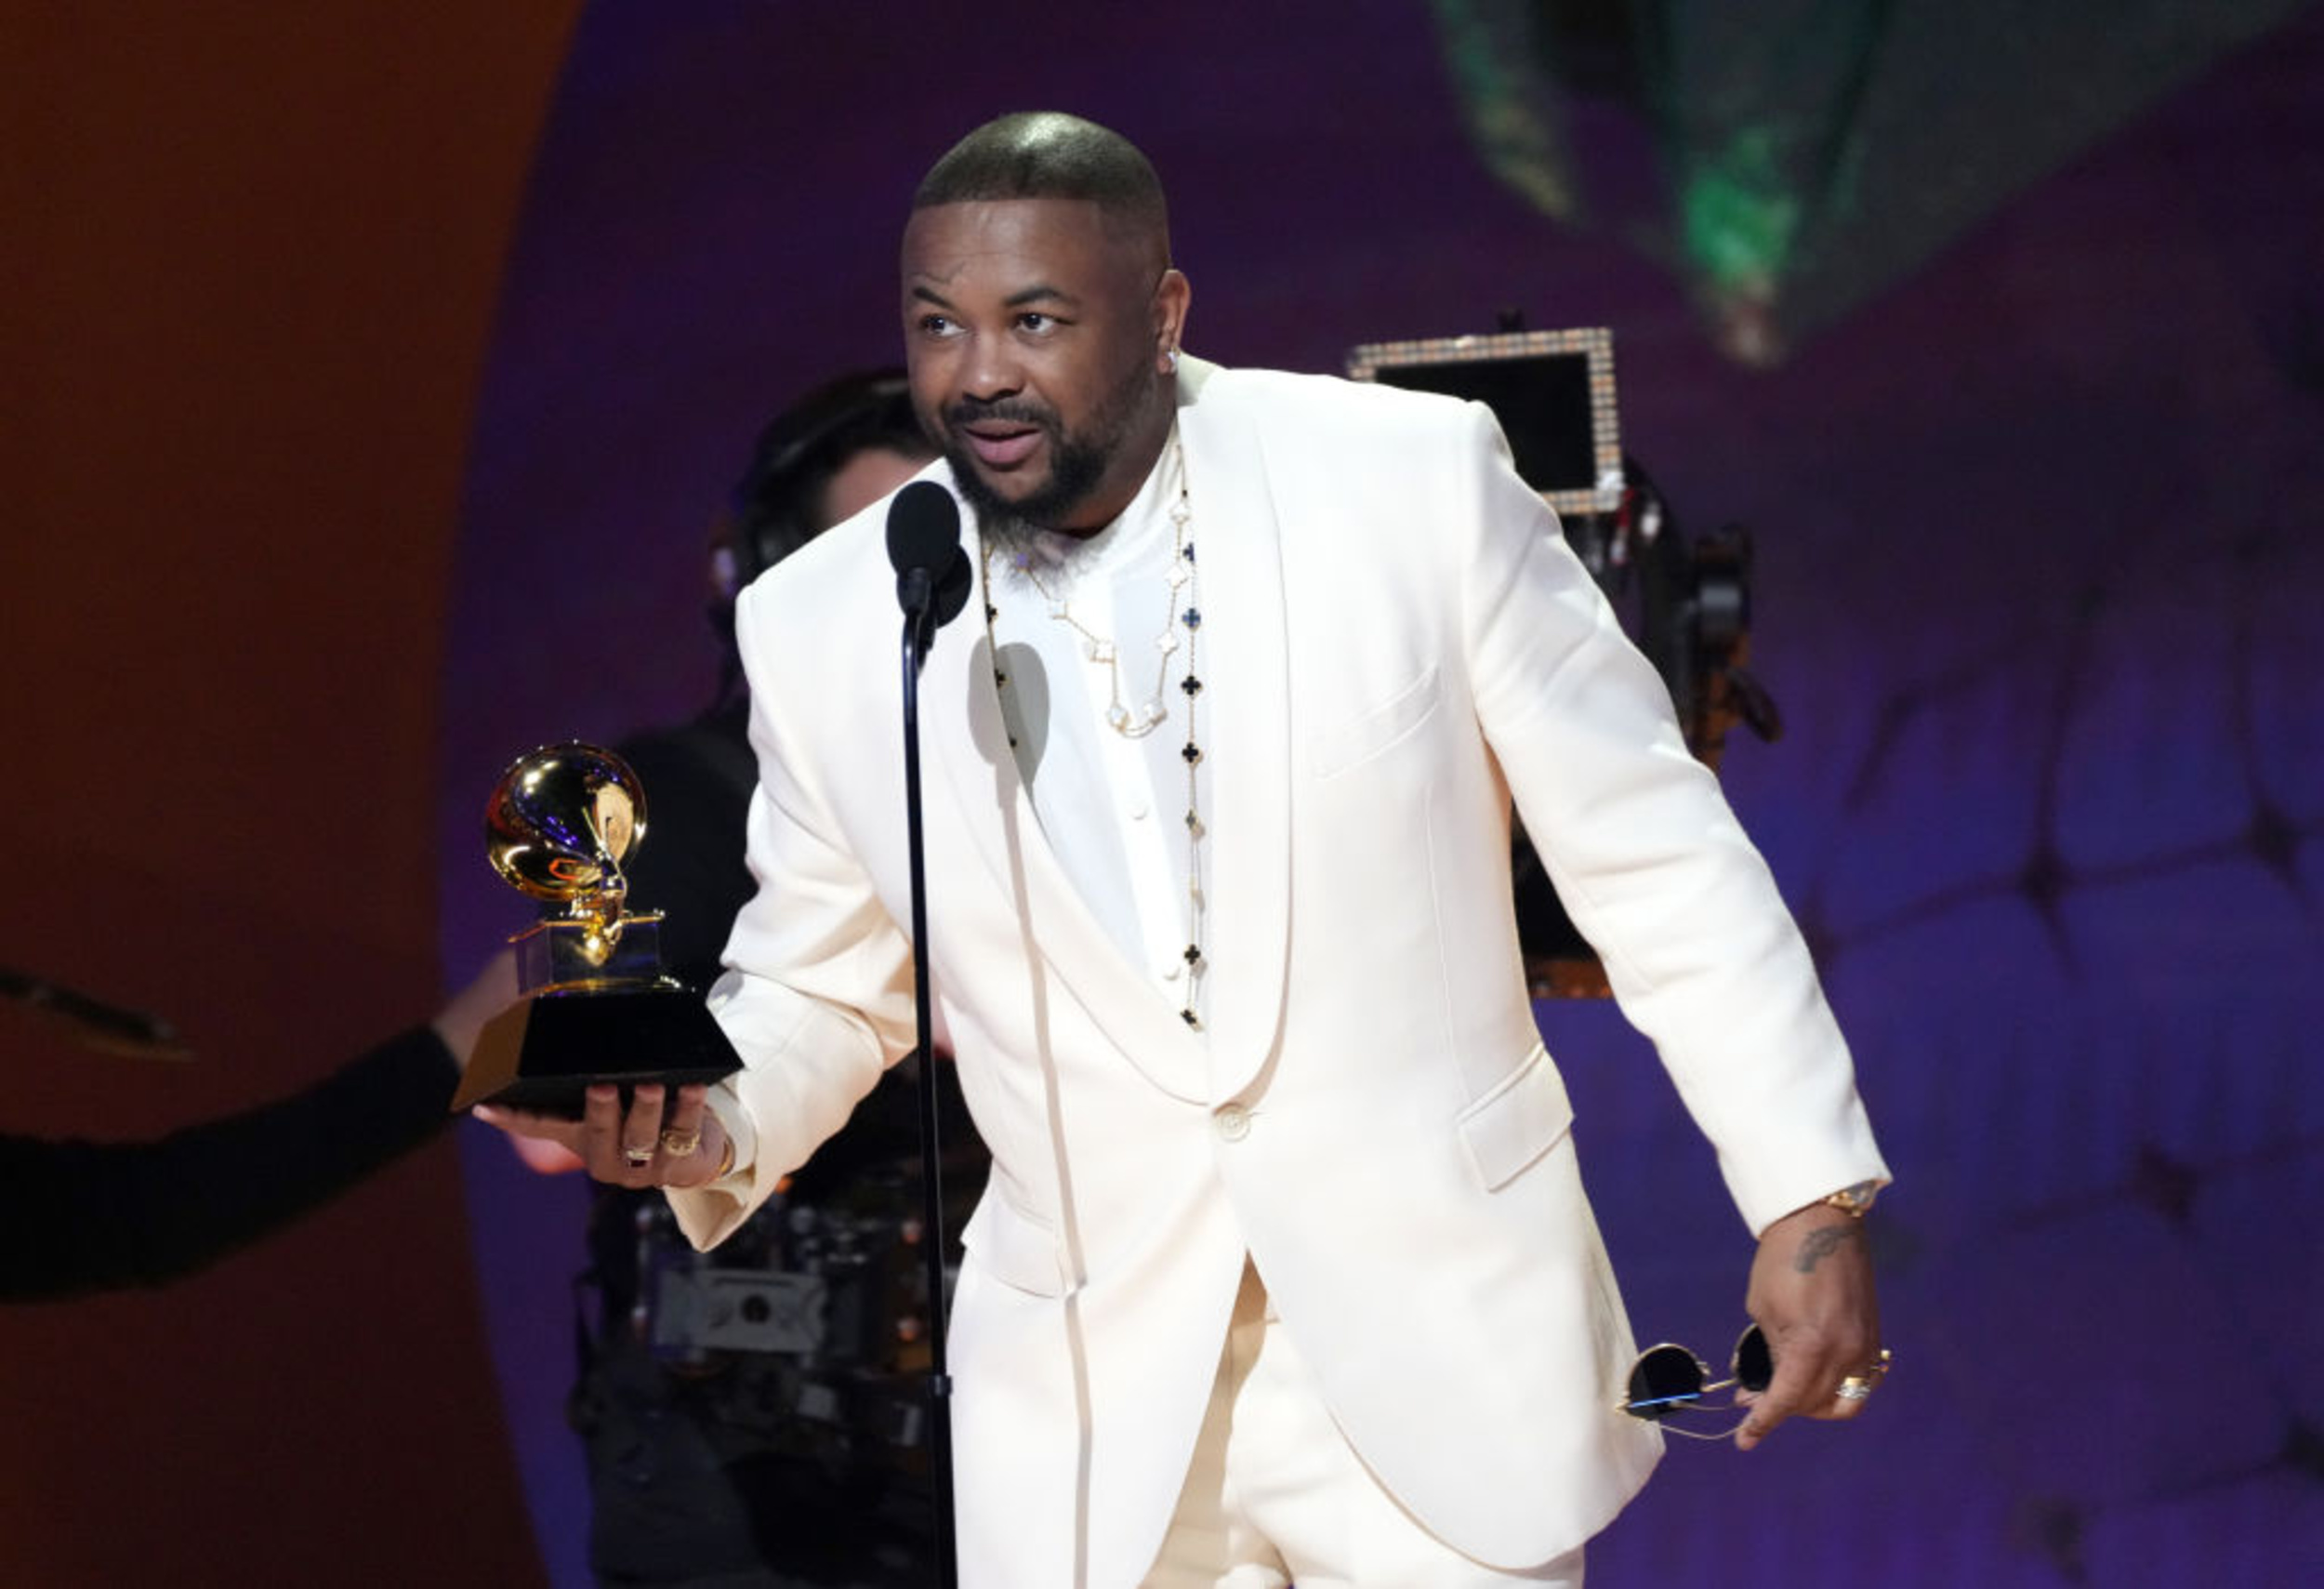 <p>The-Dream uses car metaphors to describe his wants and needs on his 2007 track <a href="https://www.youtube.com/watch?v=69J6iJUJjEI" rel="noopener noreferrer">“Fast Car.”</a> Before the beat drops, someone hopping into a car and starting the engine is heard, before The-Dream references getting intimate. As he sings on the hook, “I need a fast car, candy-coated red / Drive me all night and park it in my bed / I need a fast car, I wanna see you zoom / Racetrack waiting in my bedroom.” </p><p><a href='https://www.msn.com/en-us/community/channel/vid-cj9pqbr0vn9in2b6ddcd8sfgpfq6x6utp44fssrv6mc2gtybw0us'>Follow us on MSN to see more of our exclusive entertainment content.</a></p>